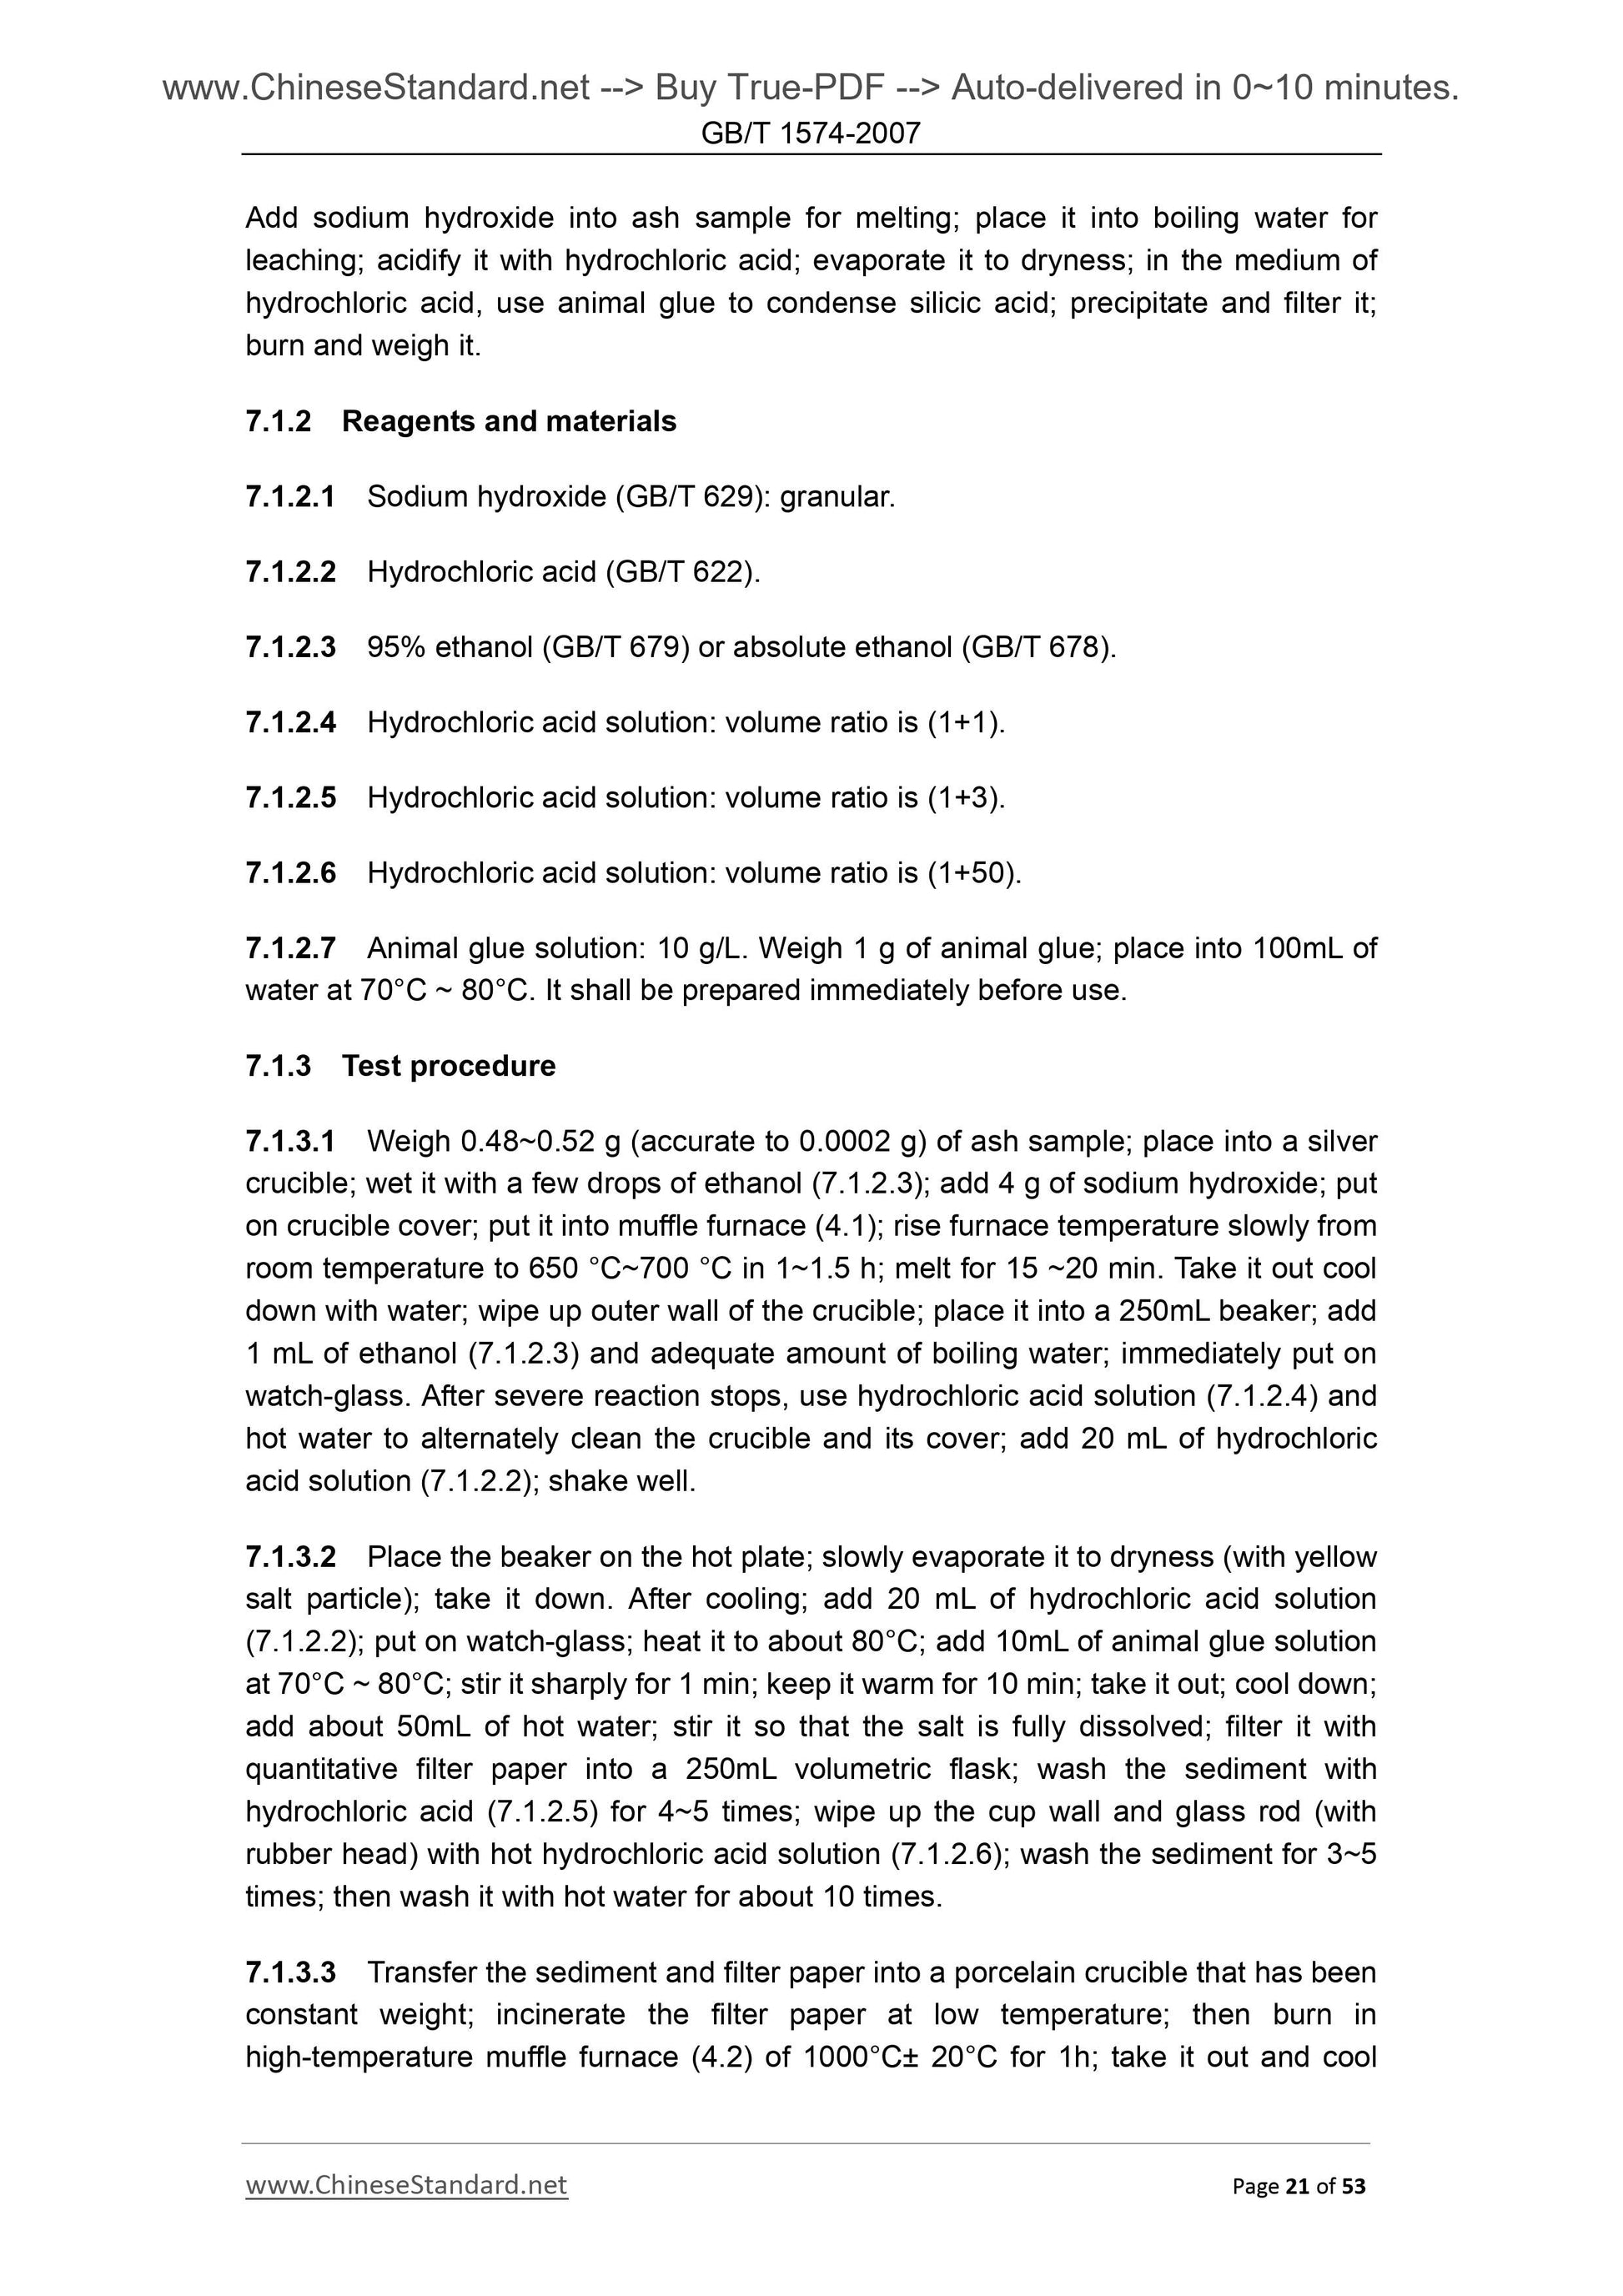 GB/T 1574-2007 Page 7